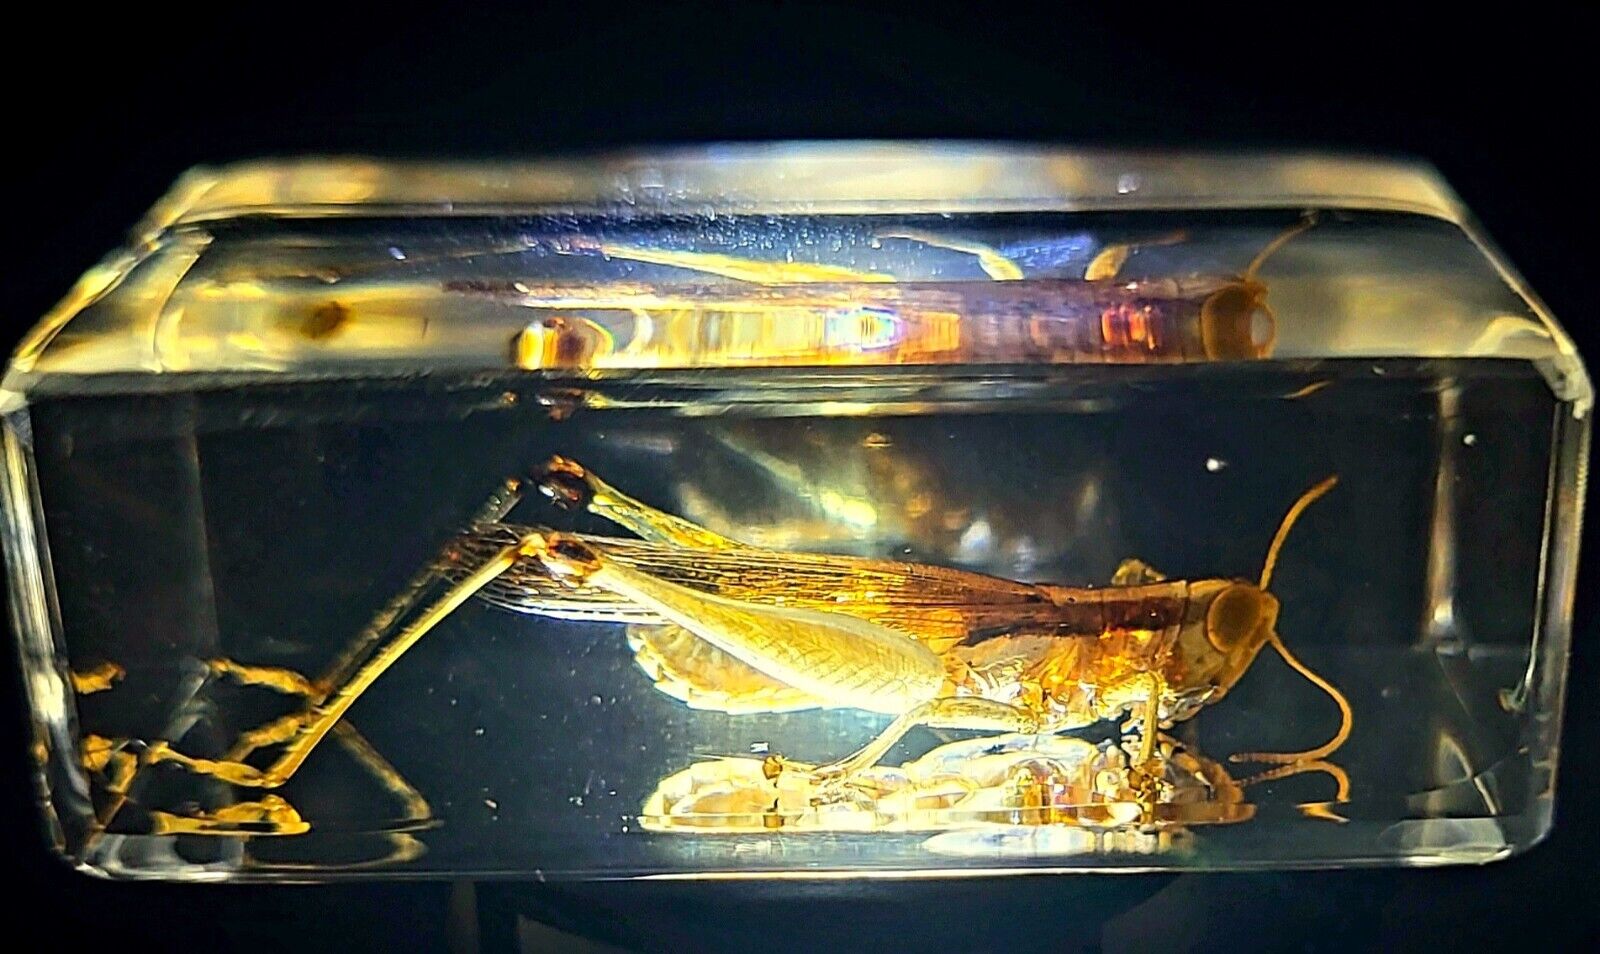 44mm Real Grasshopper in Crystal Clear Lucite Resin Science Education Specimen